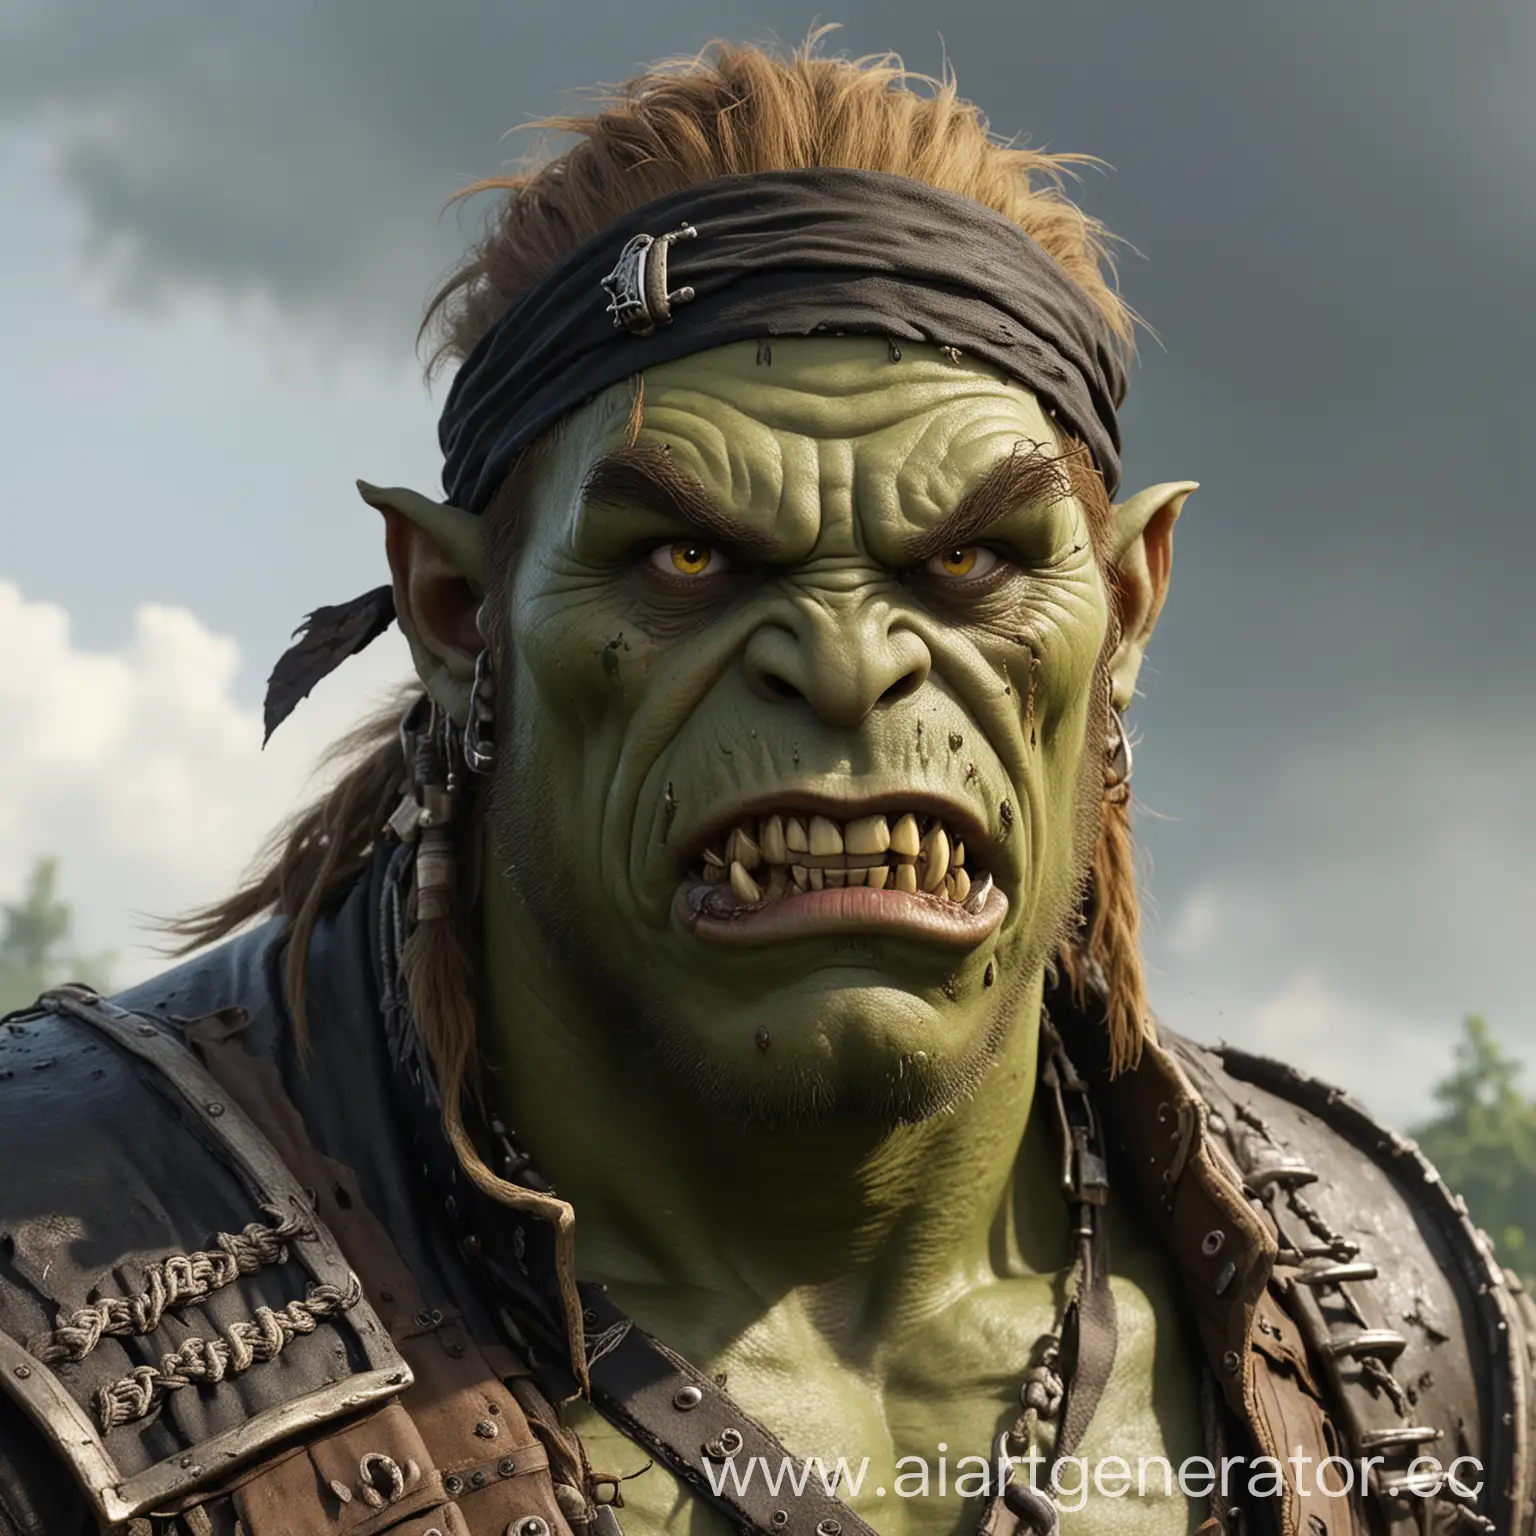 A stocky swamp-green orc-pirate with a height of 188 cm and a weight of about 130 kg with yellow-cloudy pupils and short brown hair, as well as protruding fangs with blunderbluss and wearing a pirate uniform without a hat